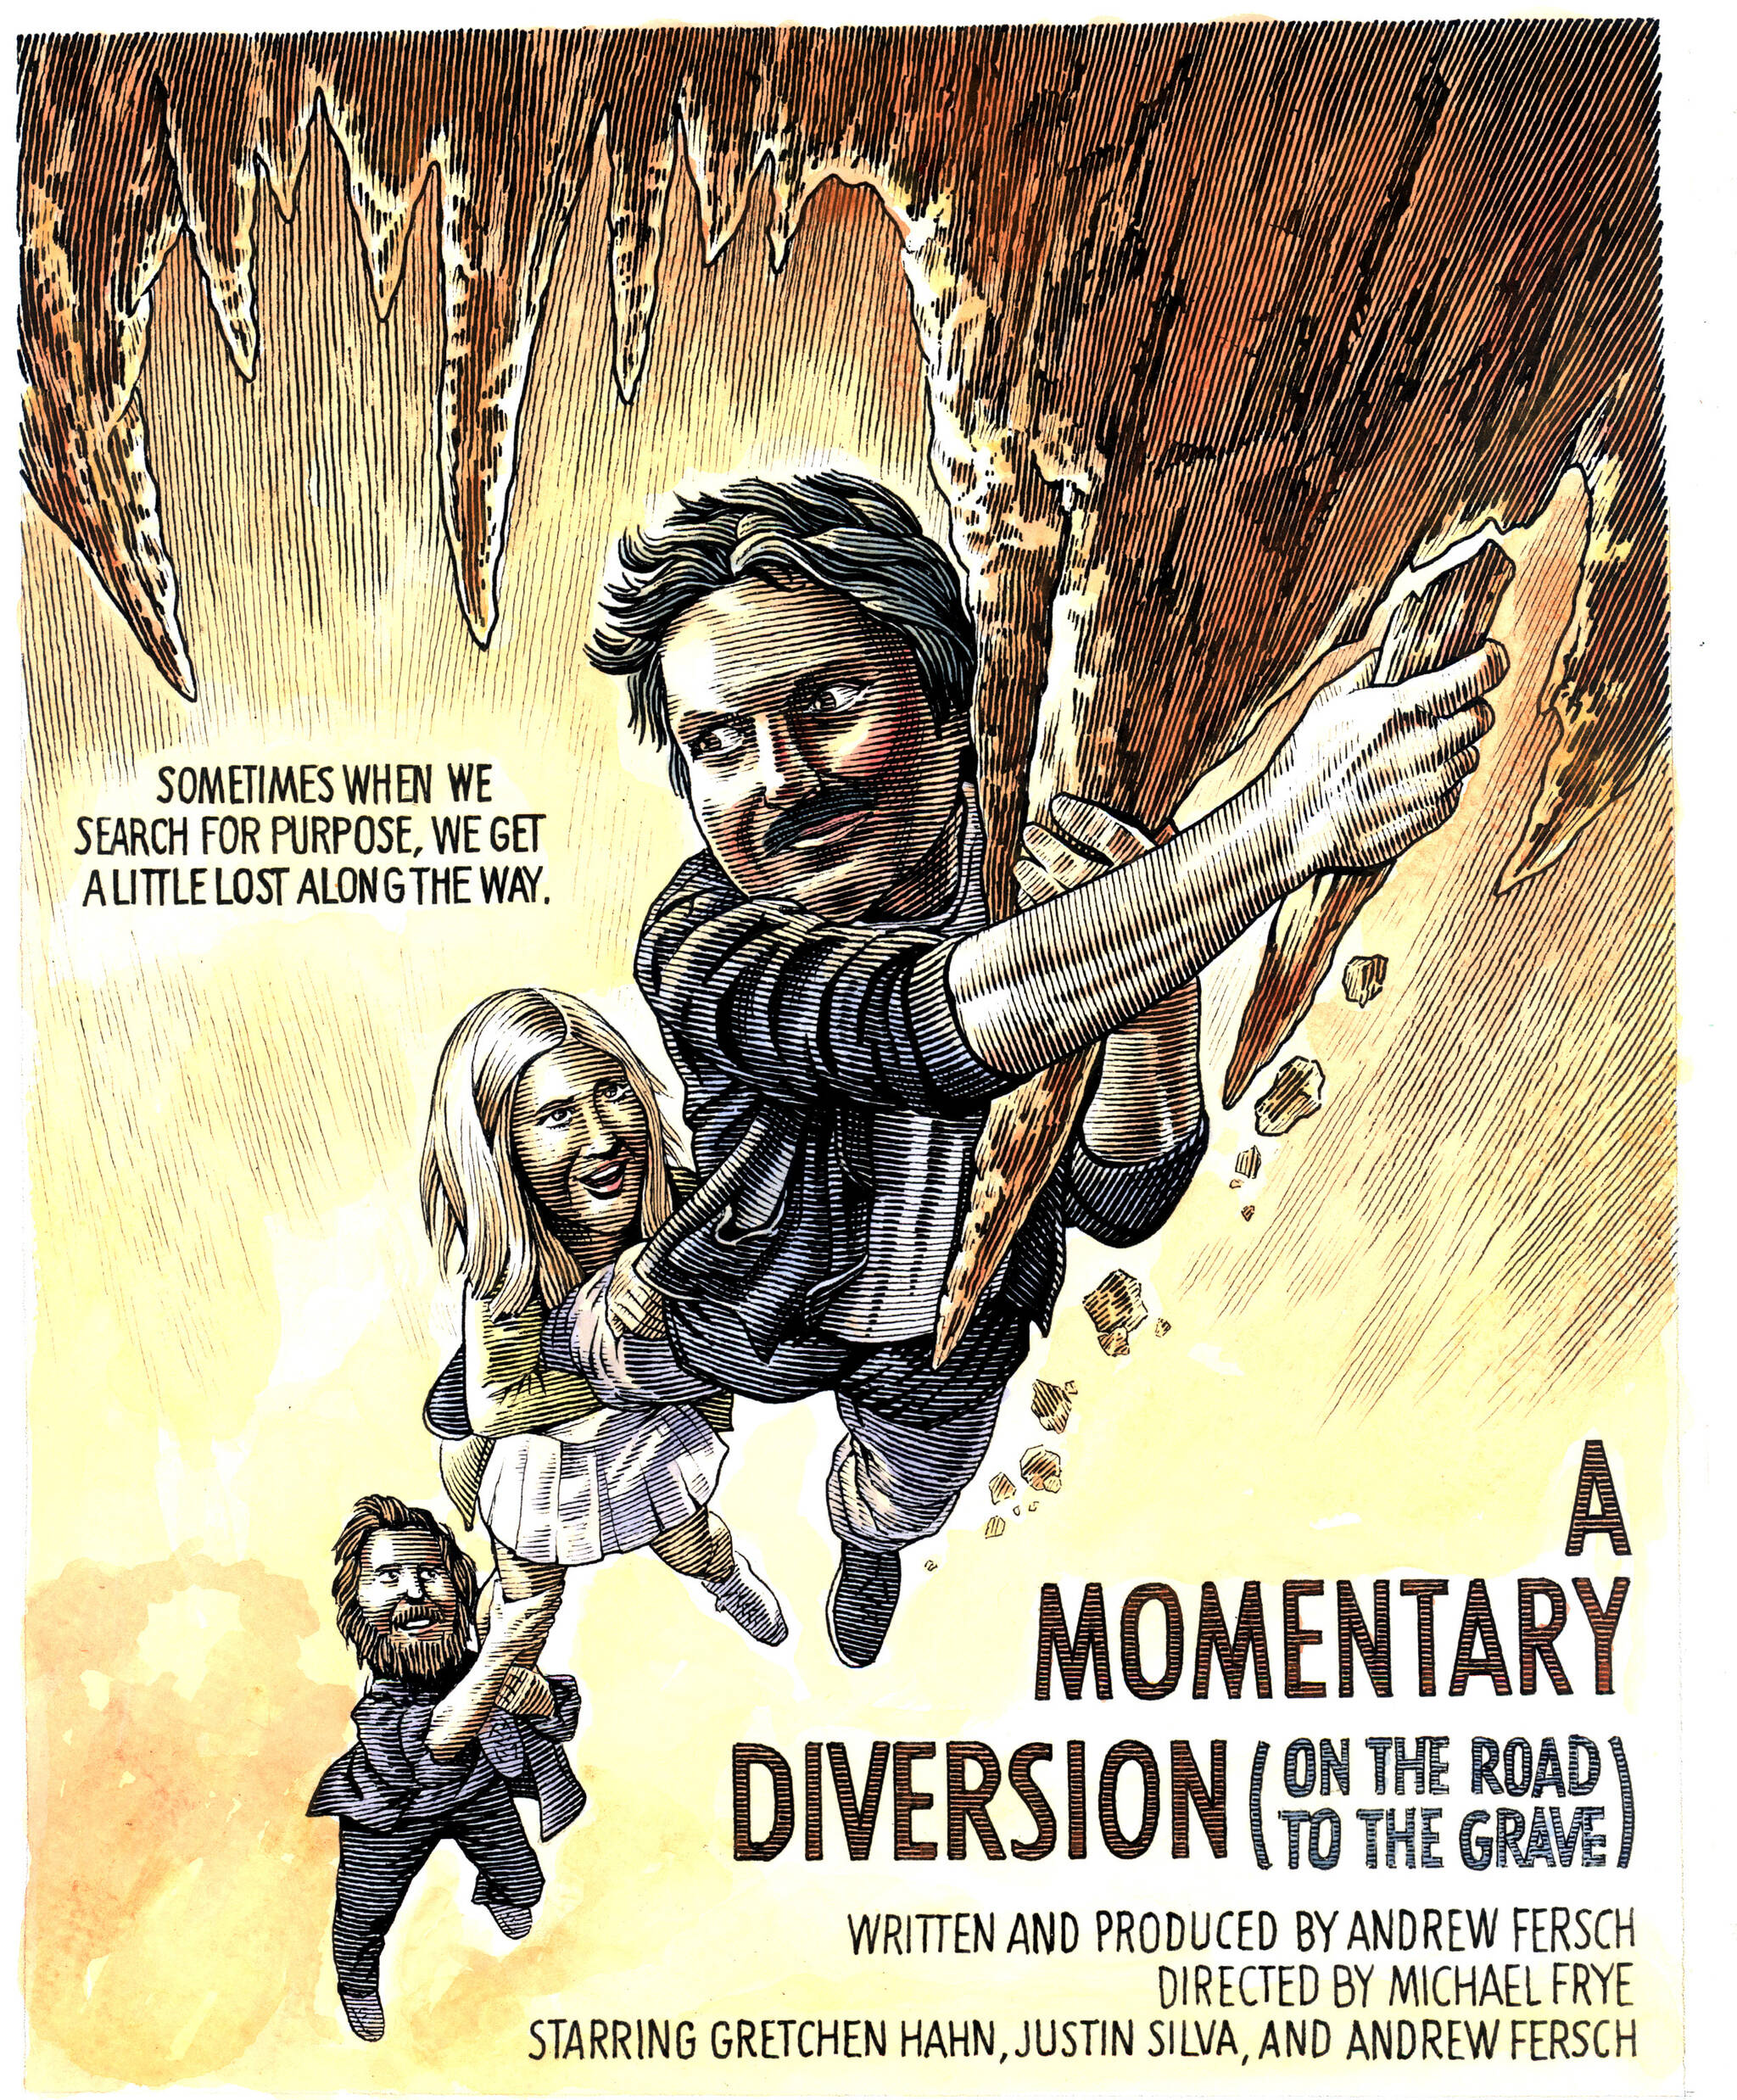 Photo provided
Made by Bruce Hutchison, the poster for “A Momentary Diversion on the Road to the Grave” is an homage to 1985 classic “The Goonies.”